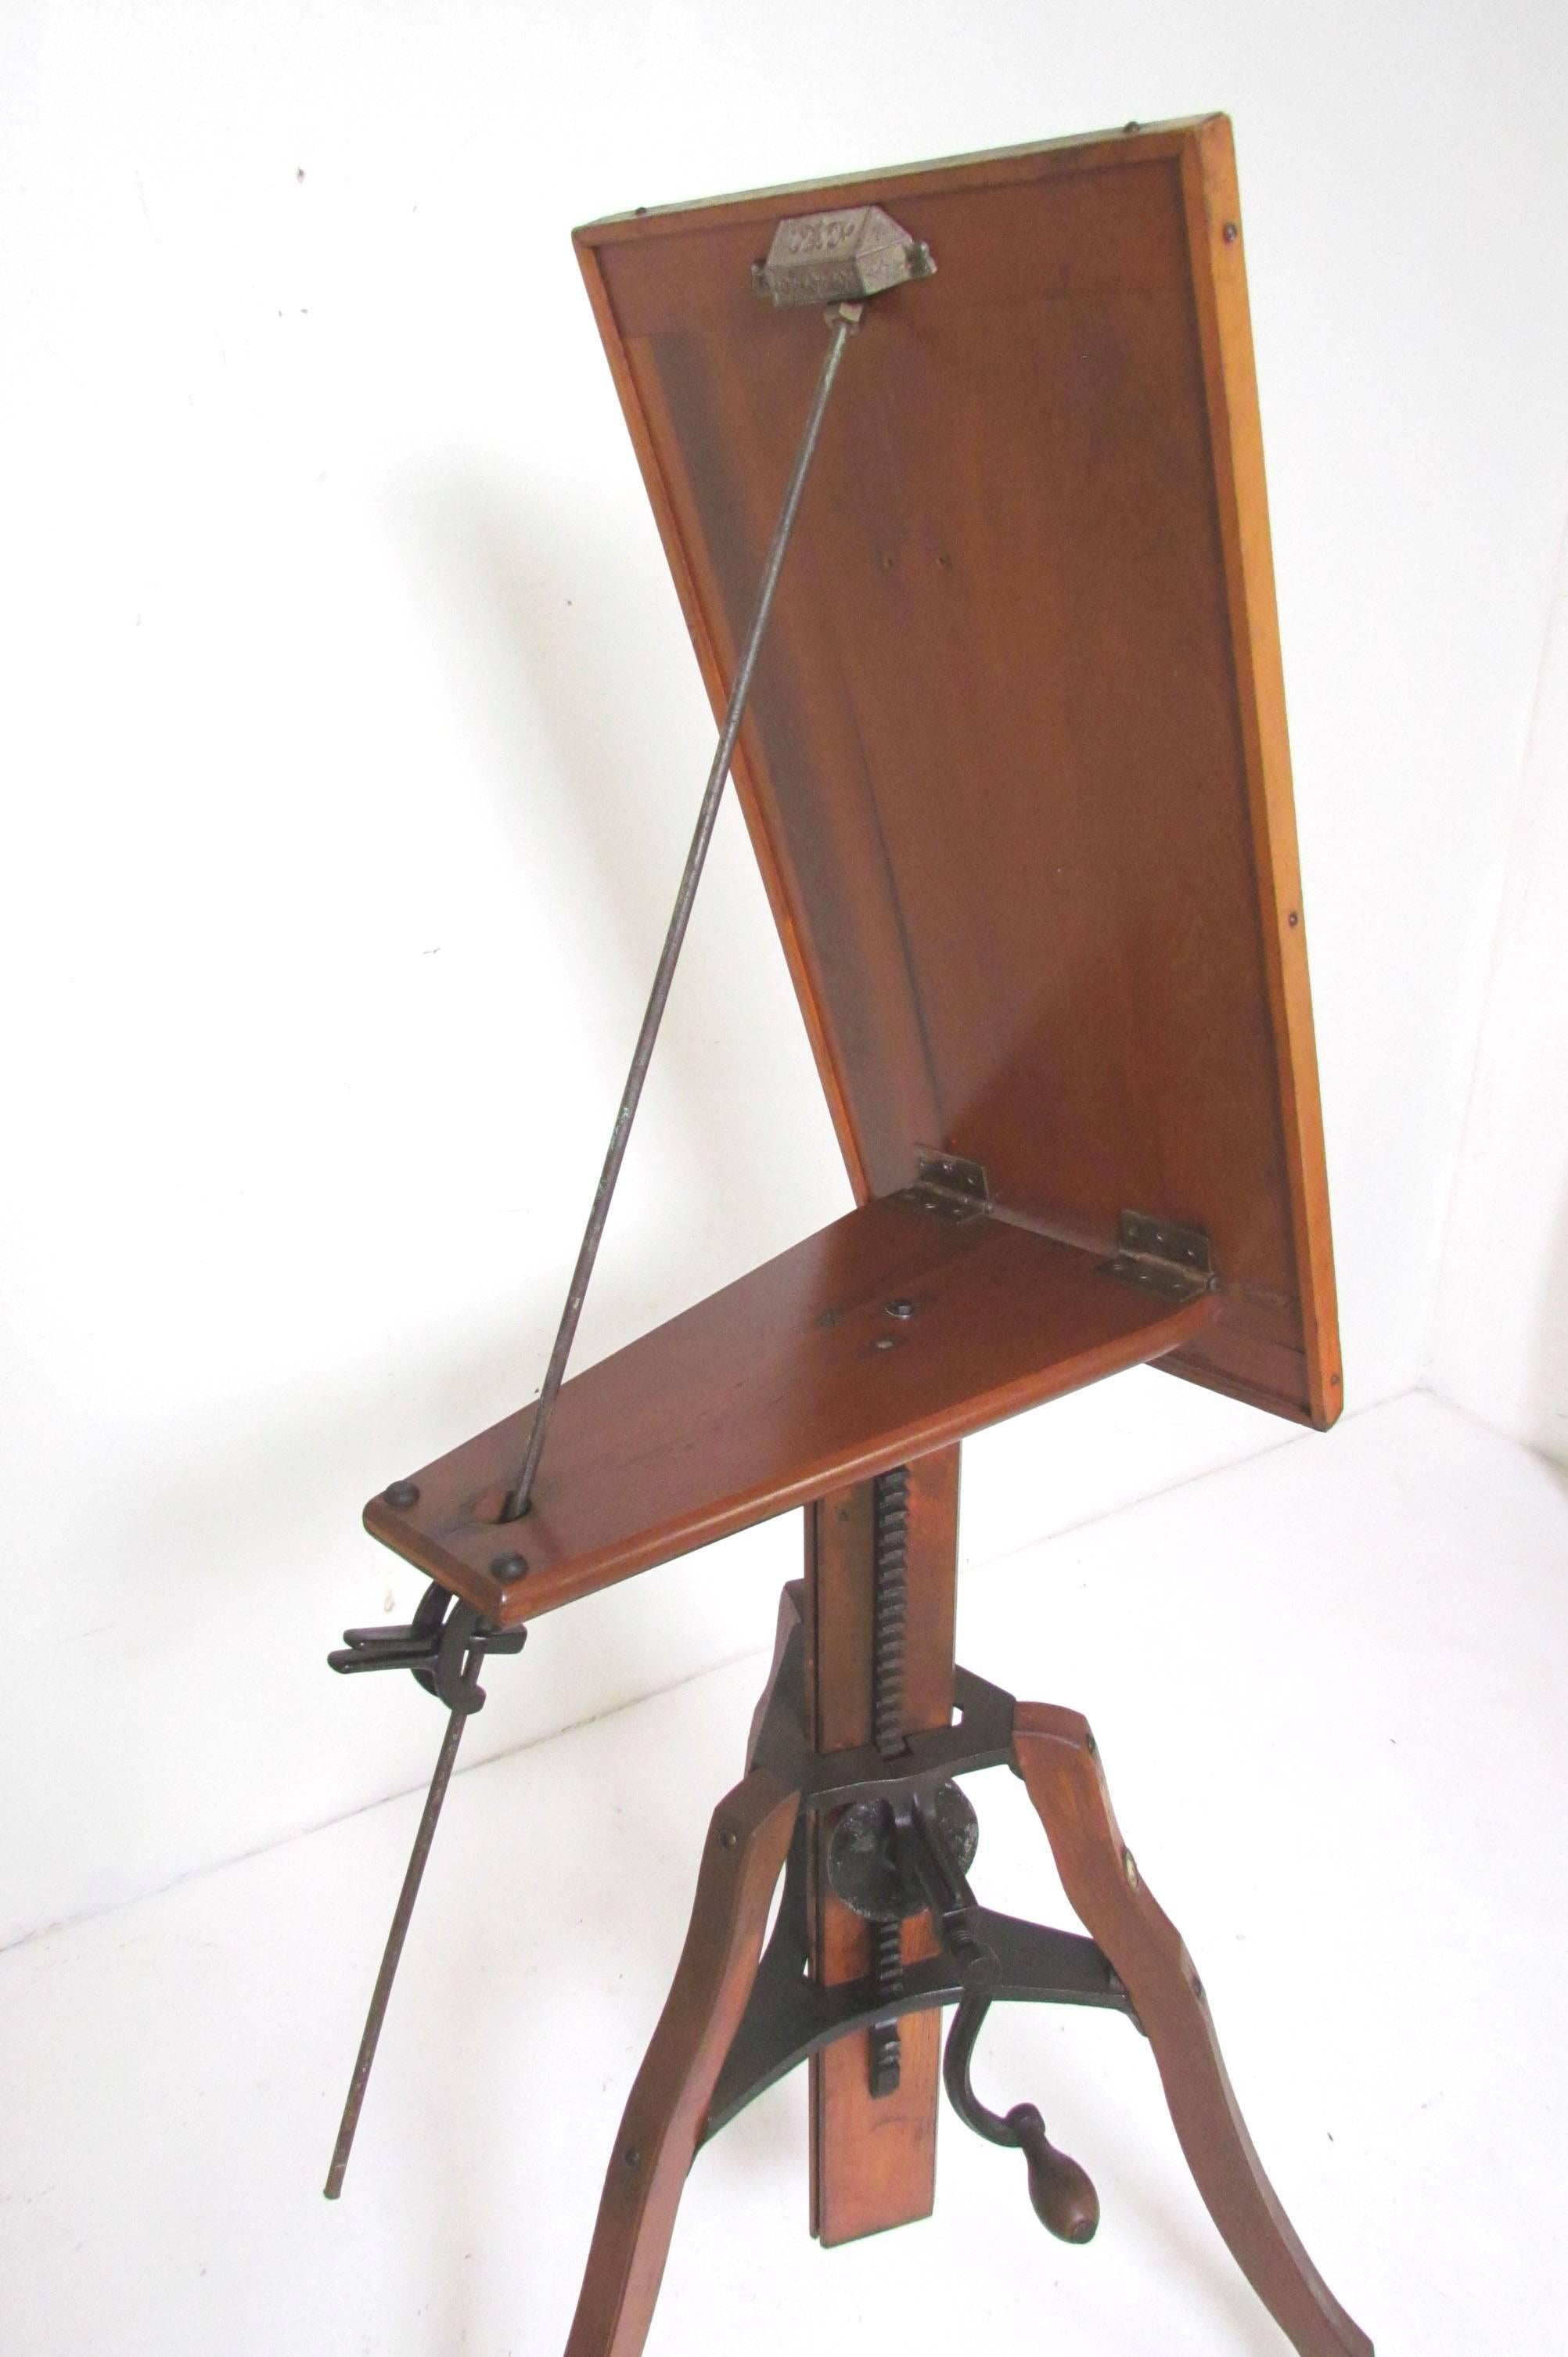 Iron Antique 19th Century Adjustable Artist's Sketching Easel